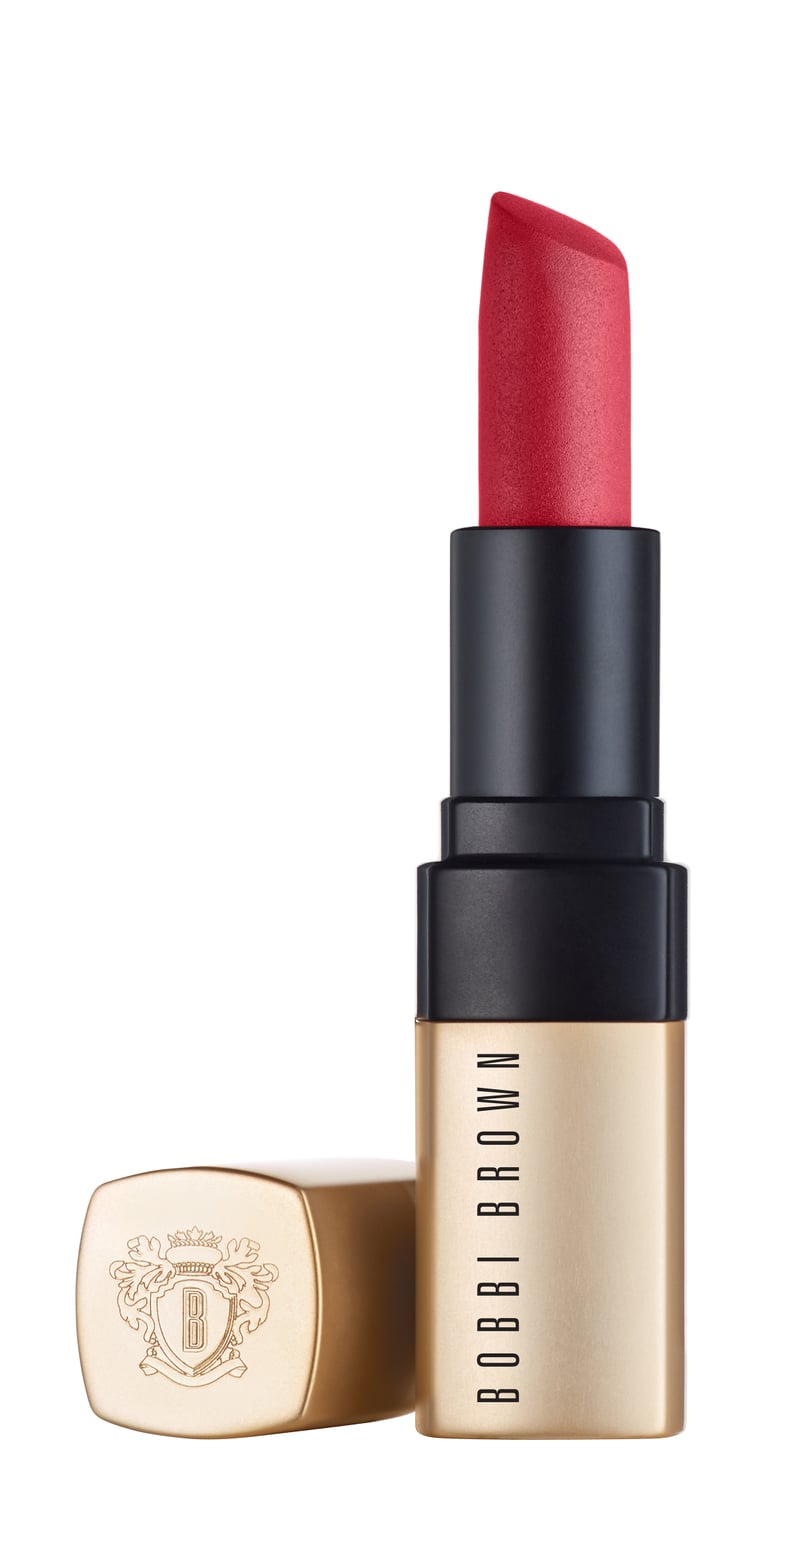 Bobbi Brown Luxe Matte in On Fire